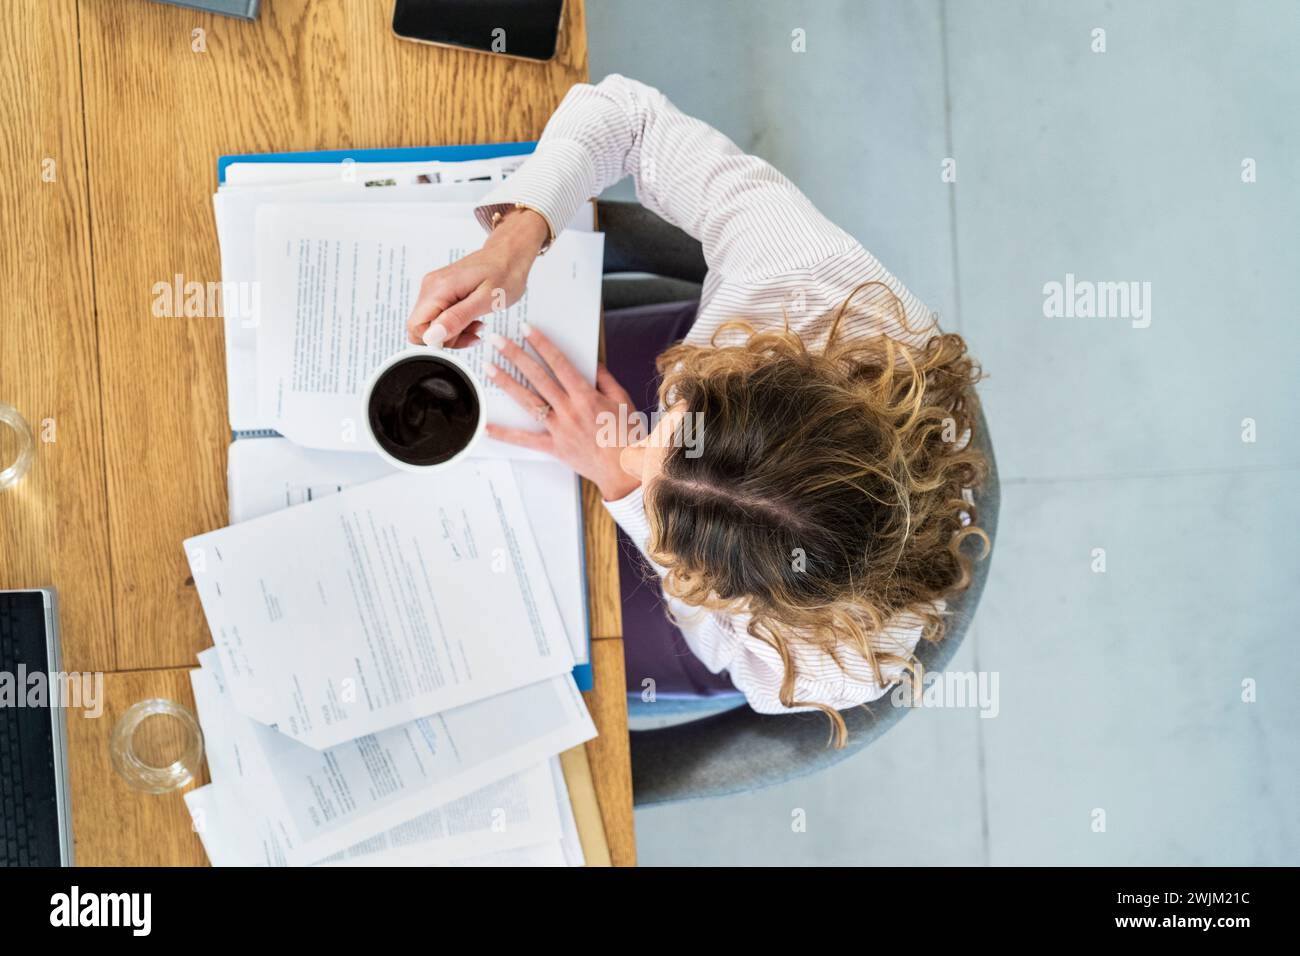 Advertising agency worker drinking coffee while doing paper work Stock Photo